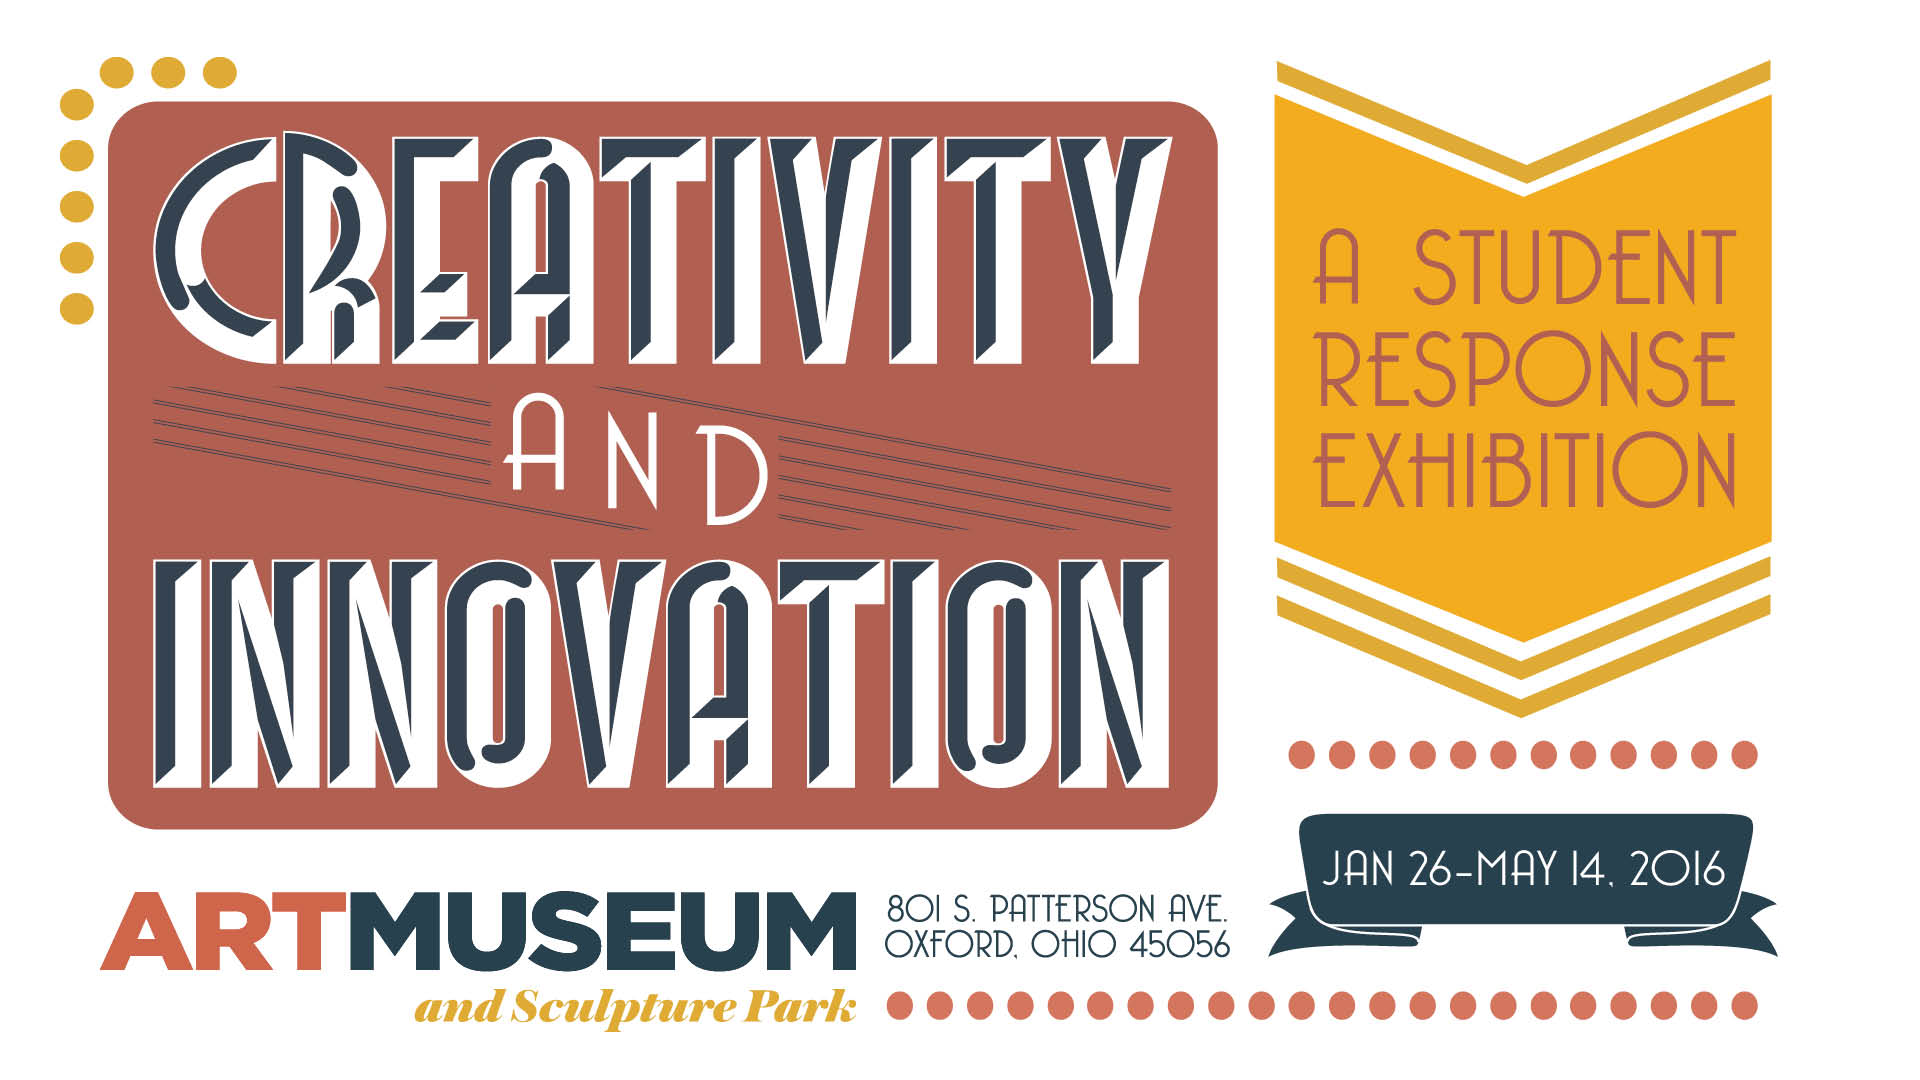 Creativity and Innovation: A Student Response Exhibition January 26- May 14, 2016